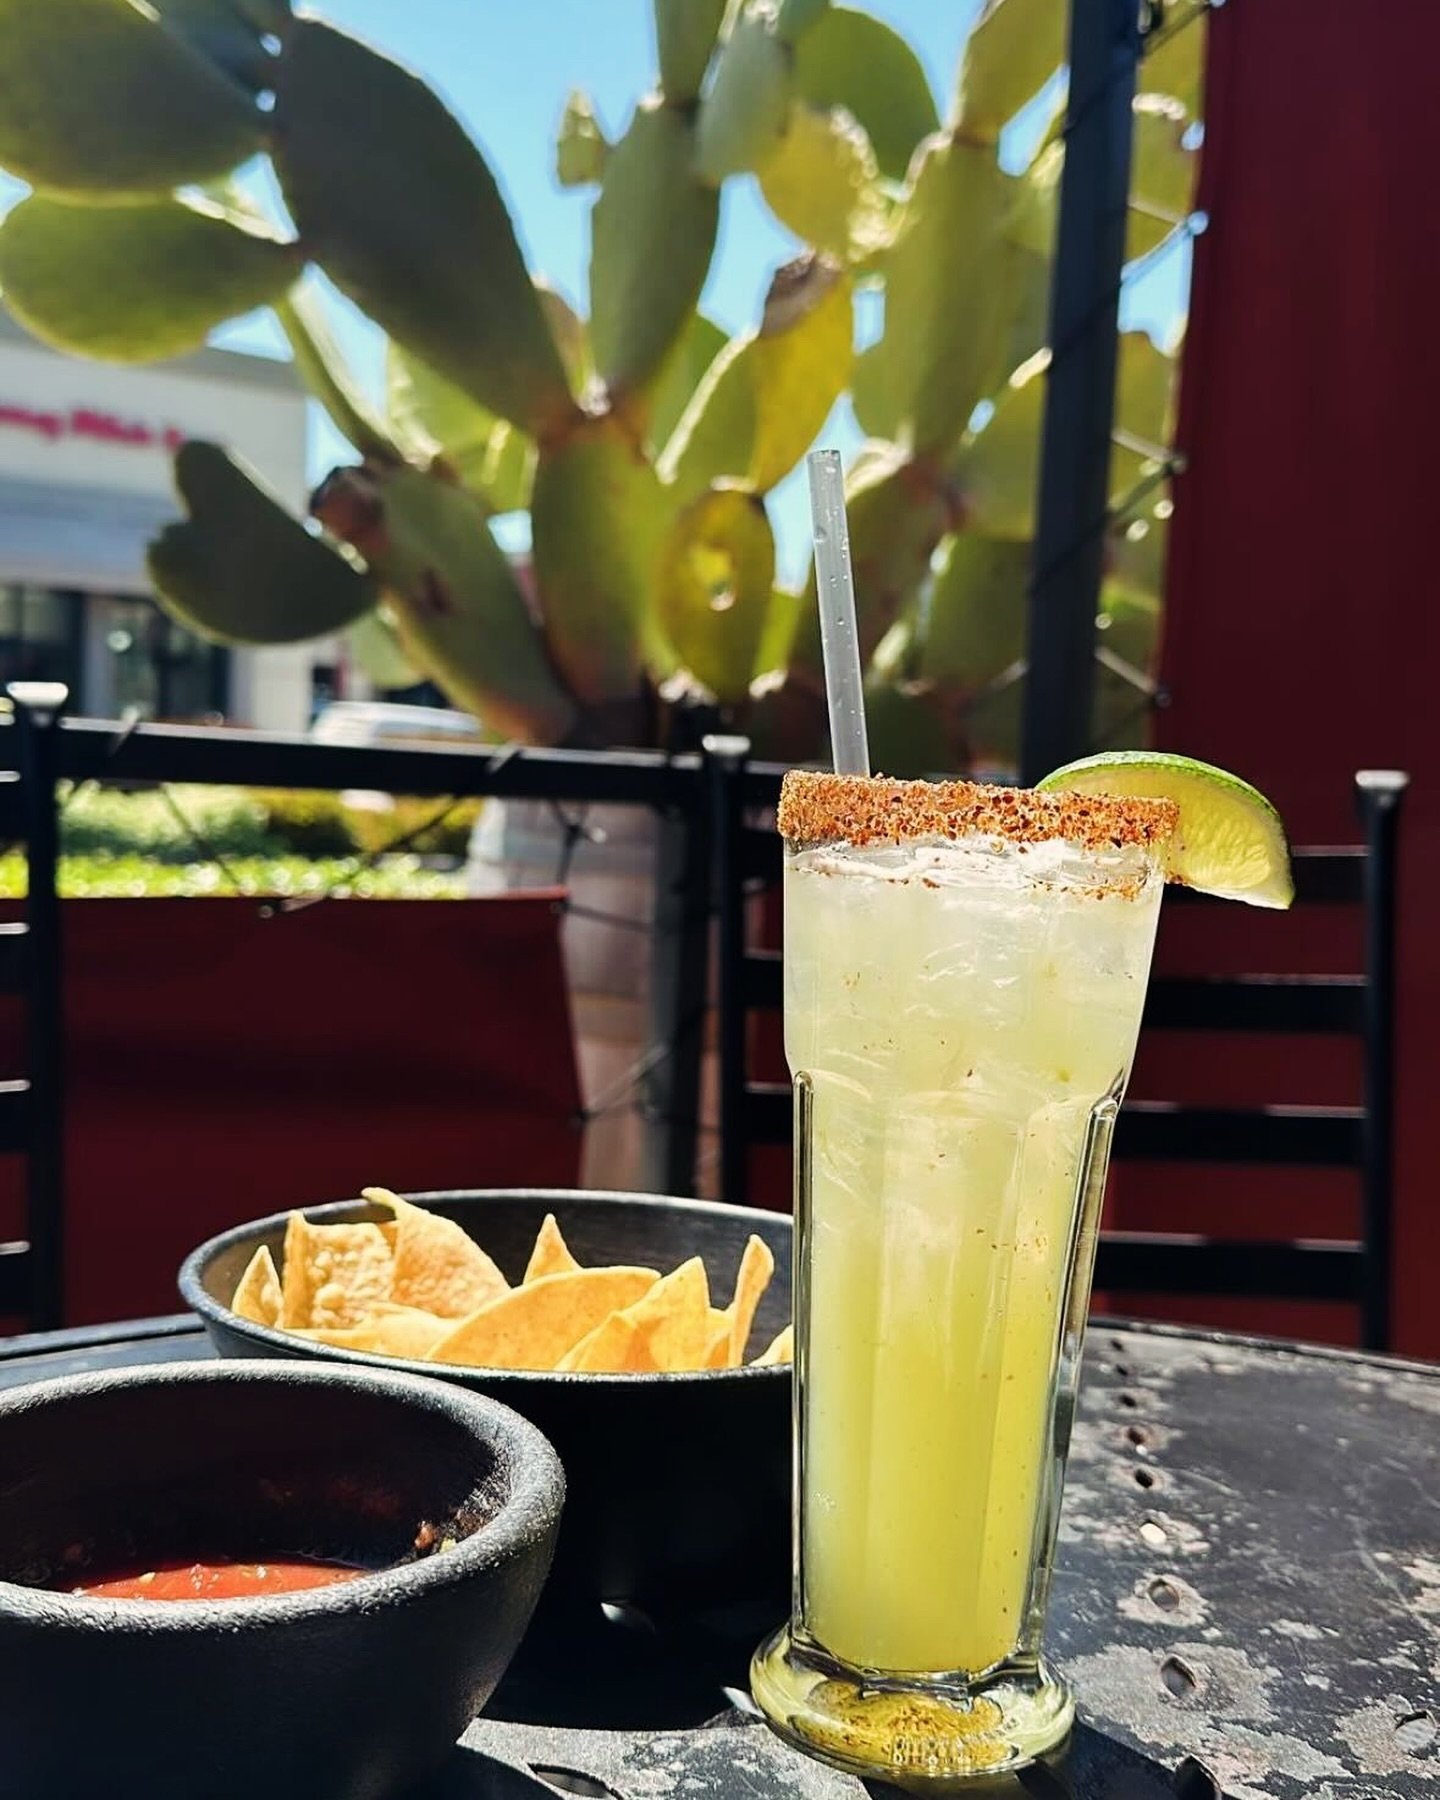 It&rsquo;s margarita degrees outside ☀️🍹⛱️

#hotplatehotplate #guadgrill #margarita #patioweather #tequila #spring #texmex #calmex #mexicanfood #eastbayeats #concordeats #visitconcordca